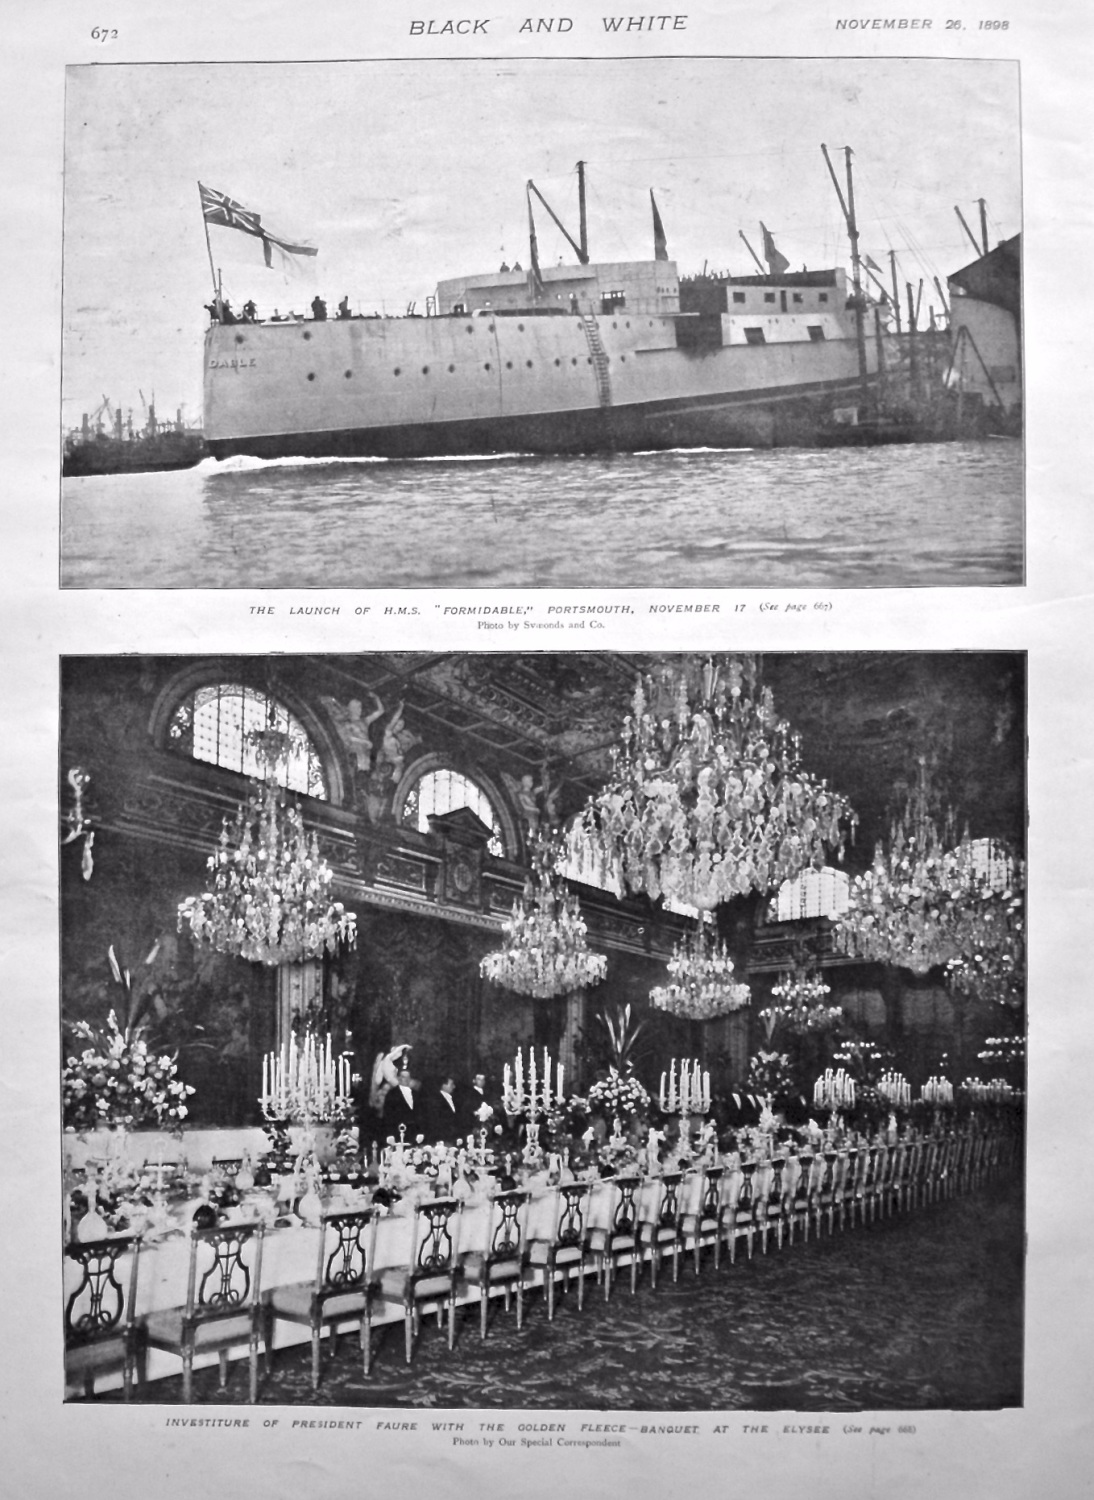 Launch of H.M.S. 